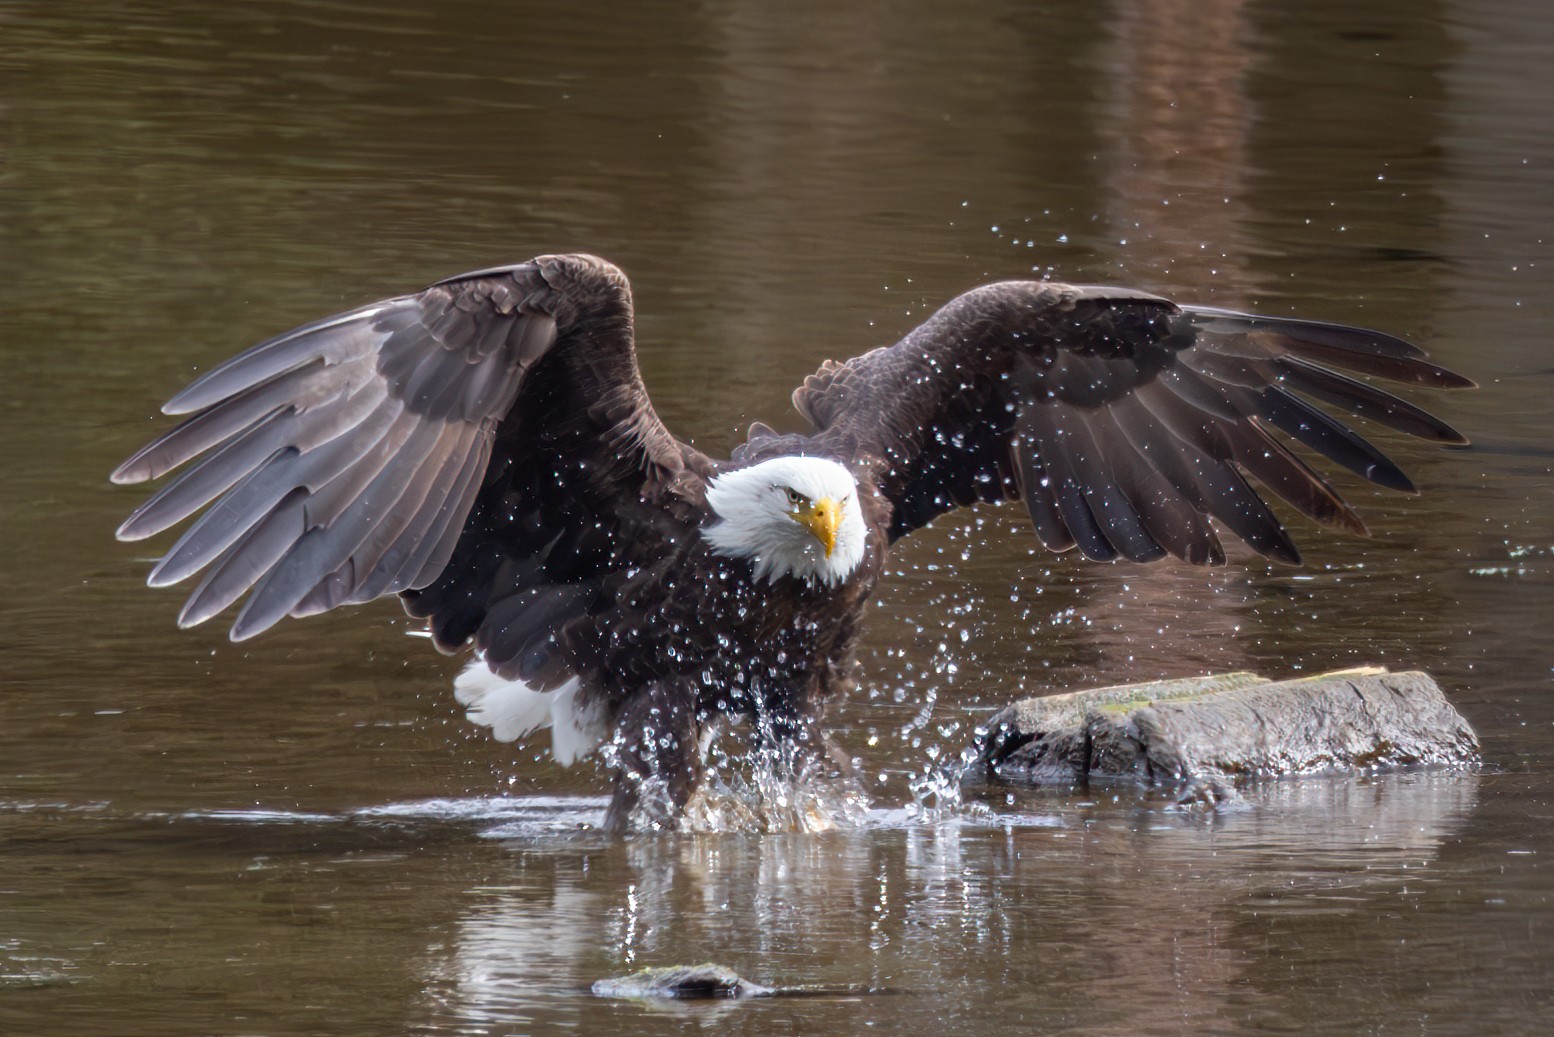 Eagle taking off to hunt fish in a creek.